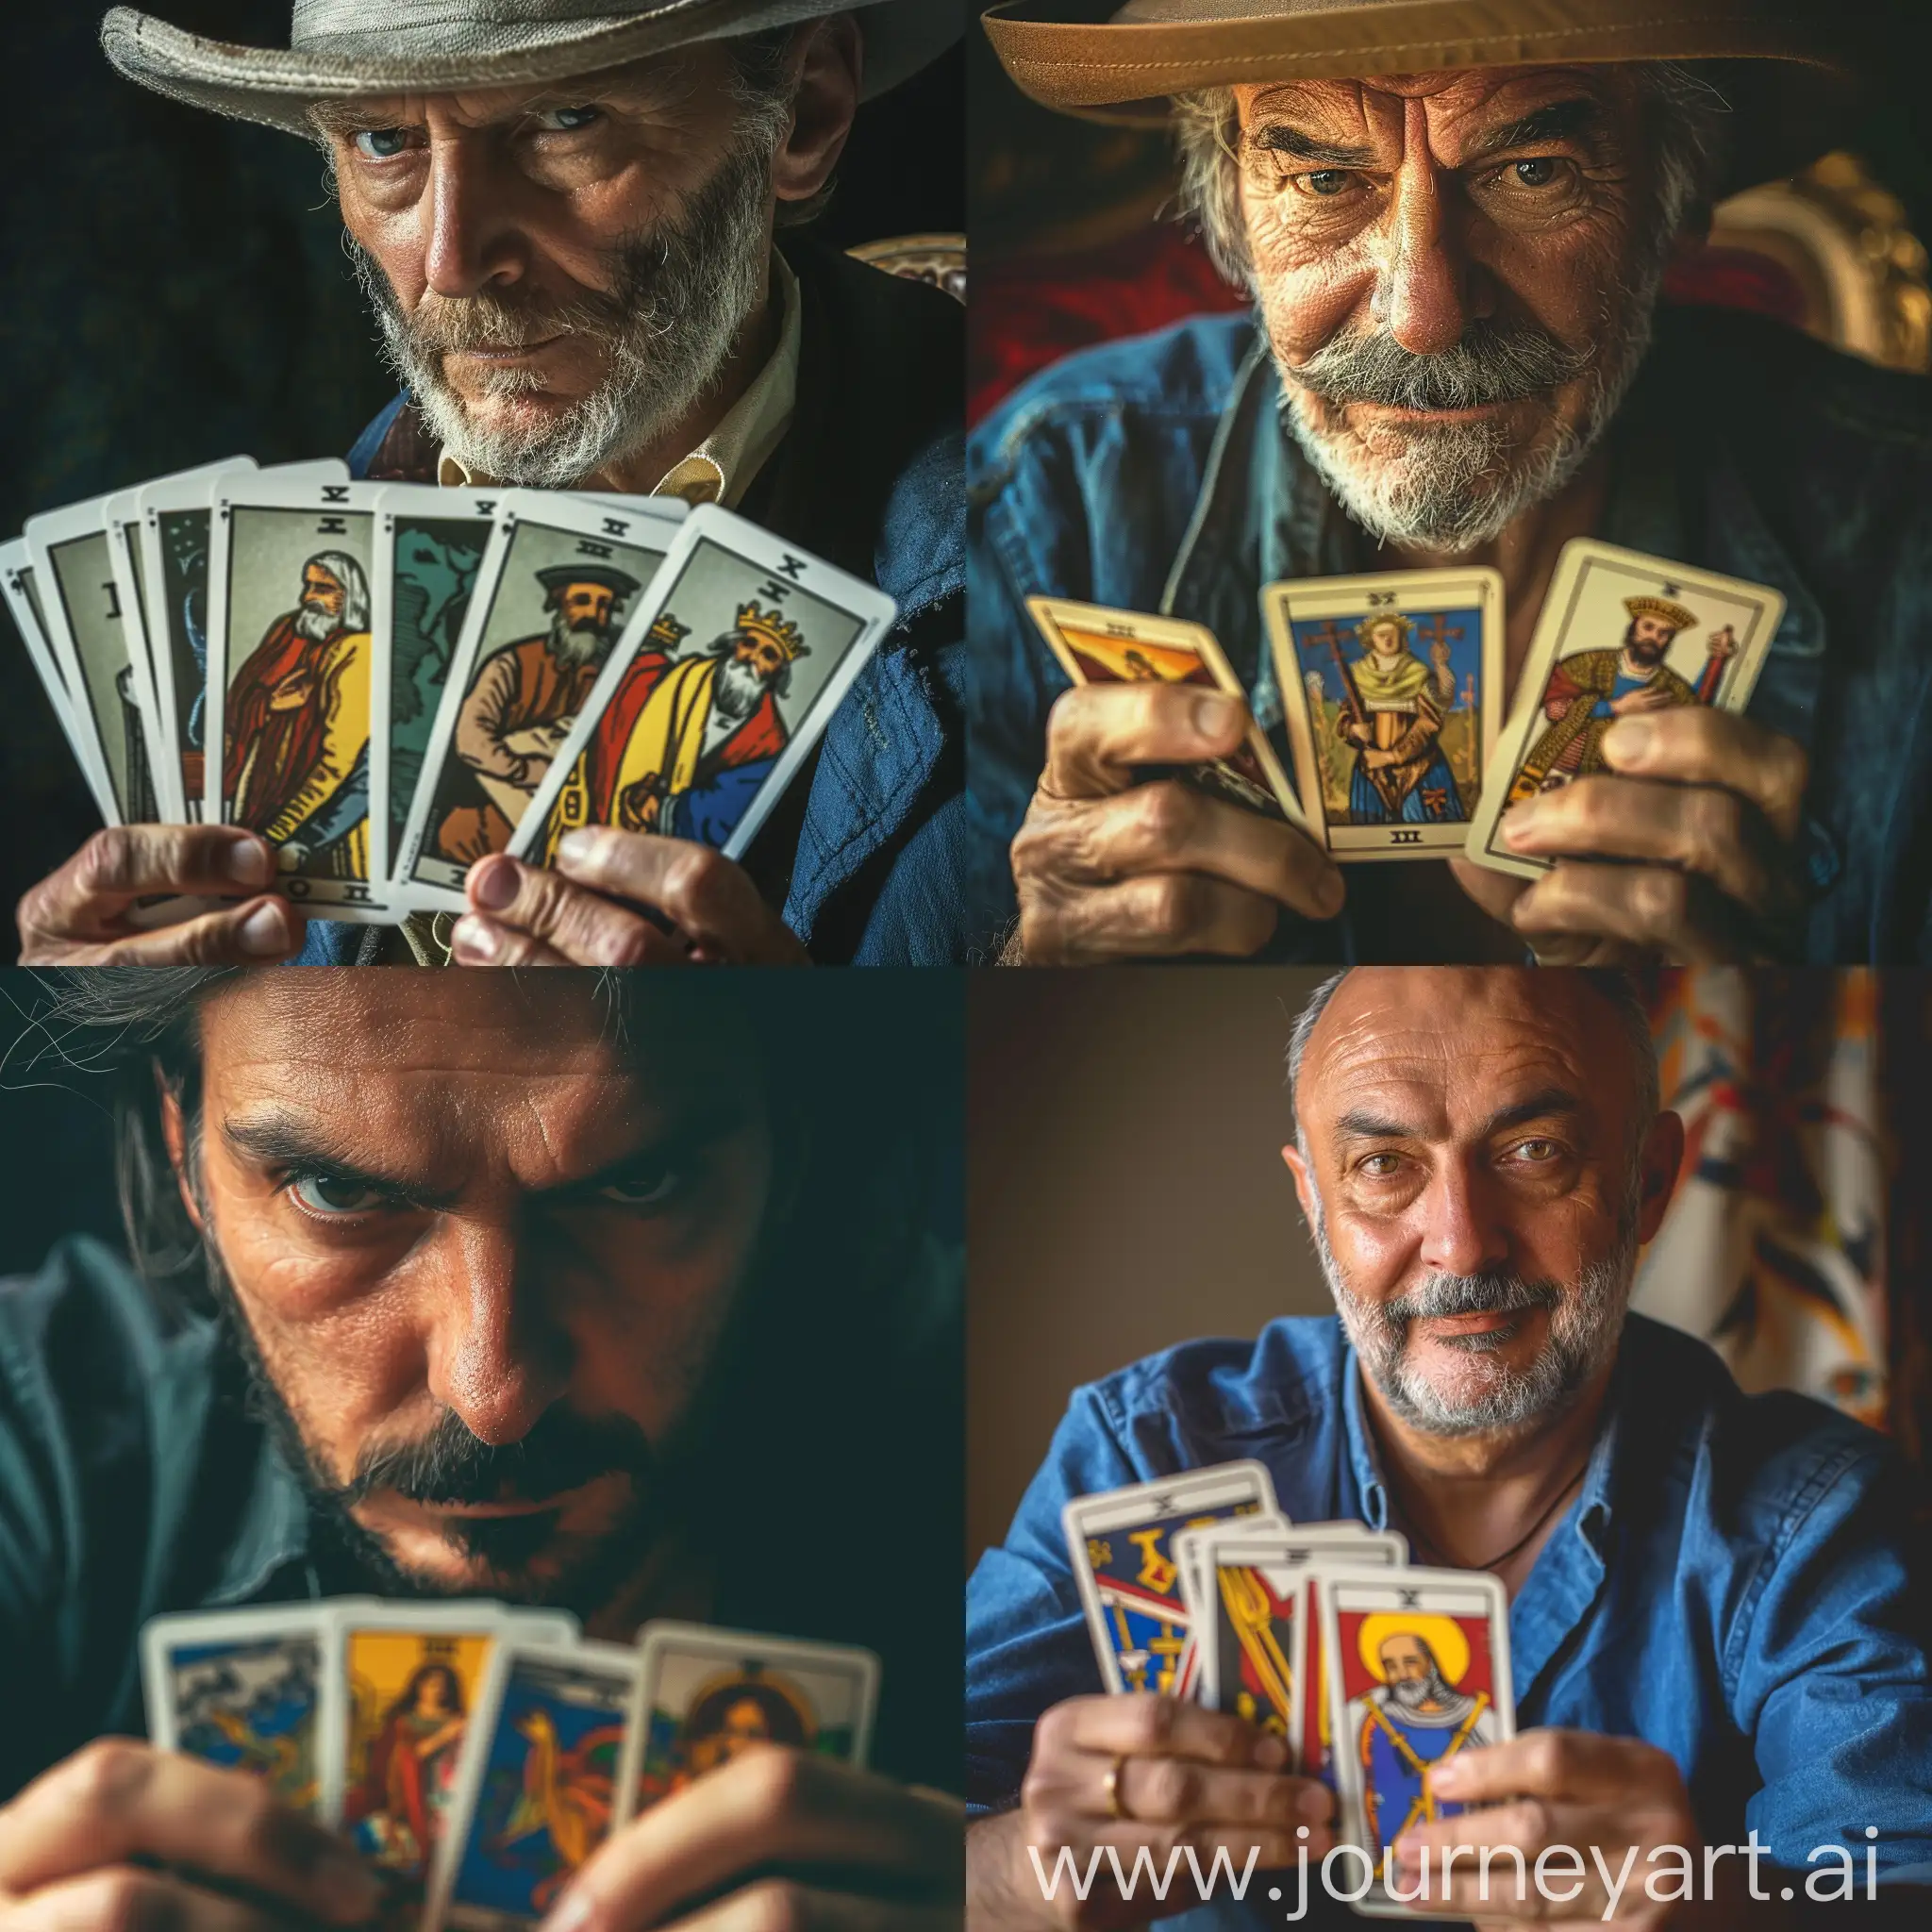 a mysterious man
From the front and close view
He is holding tarot cards